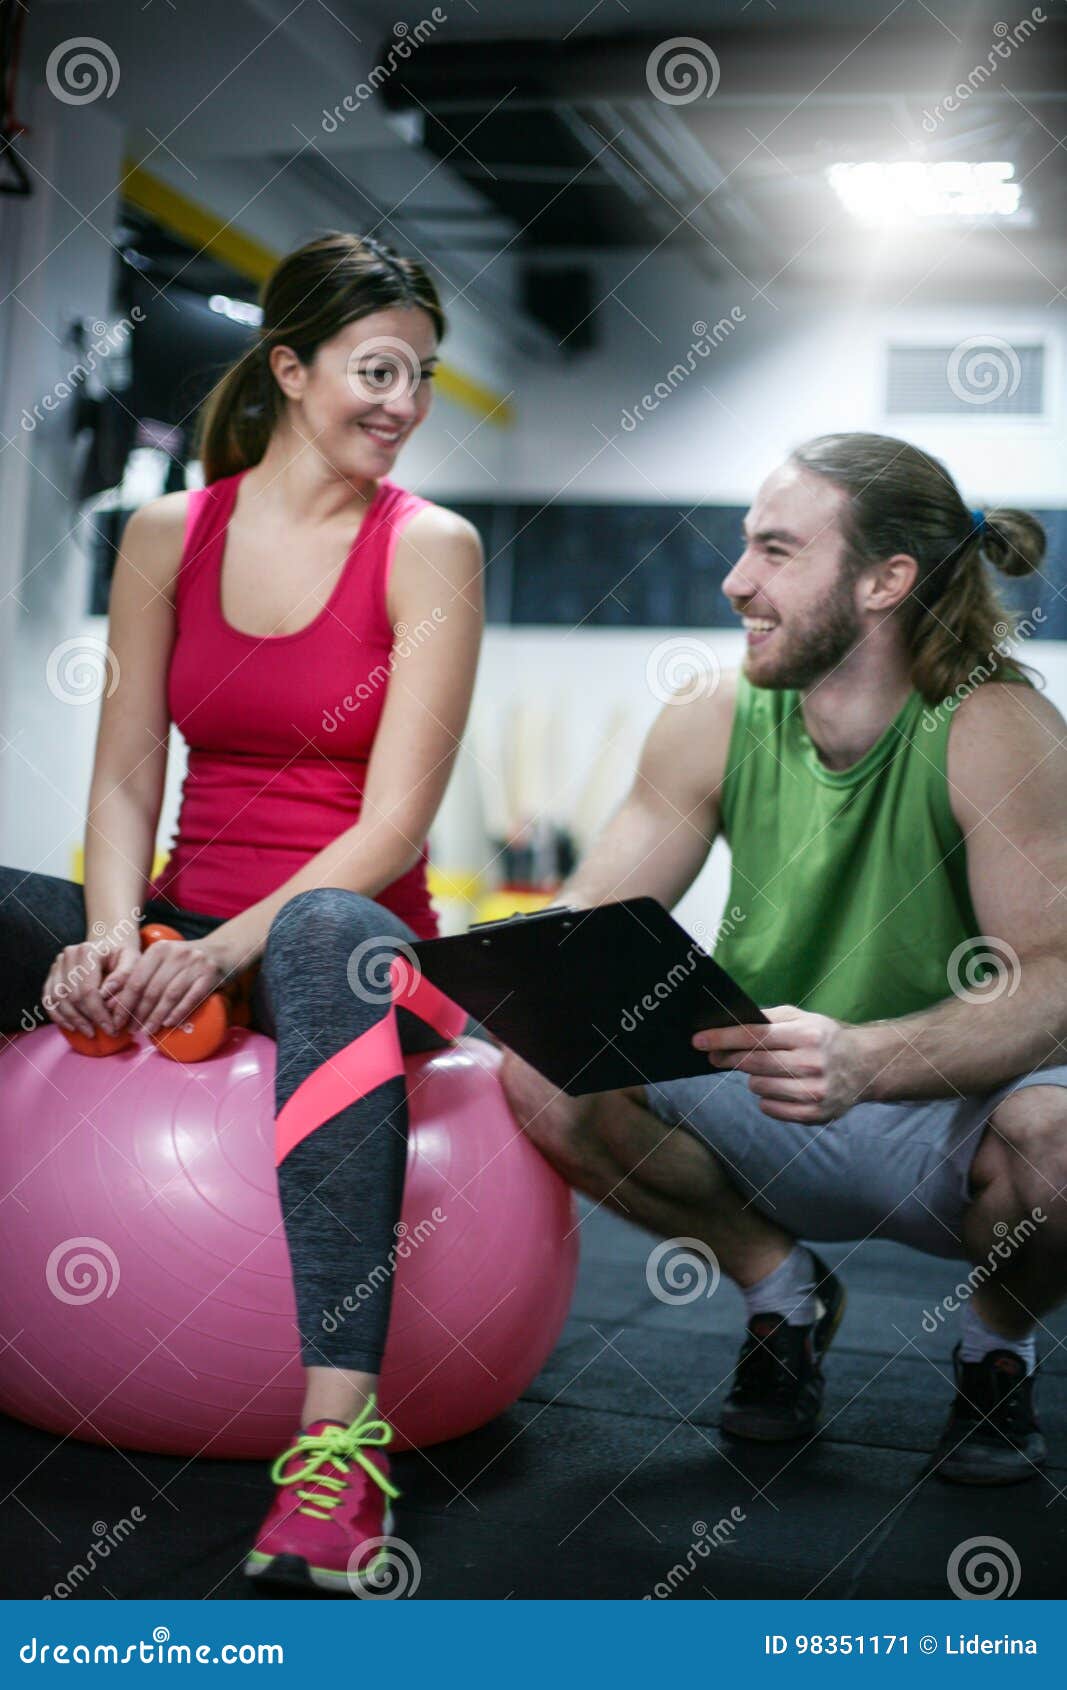 Personal Trainer Having A Training Consultation With A